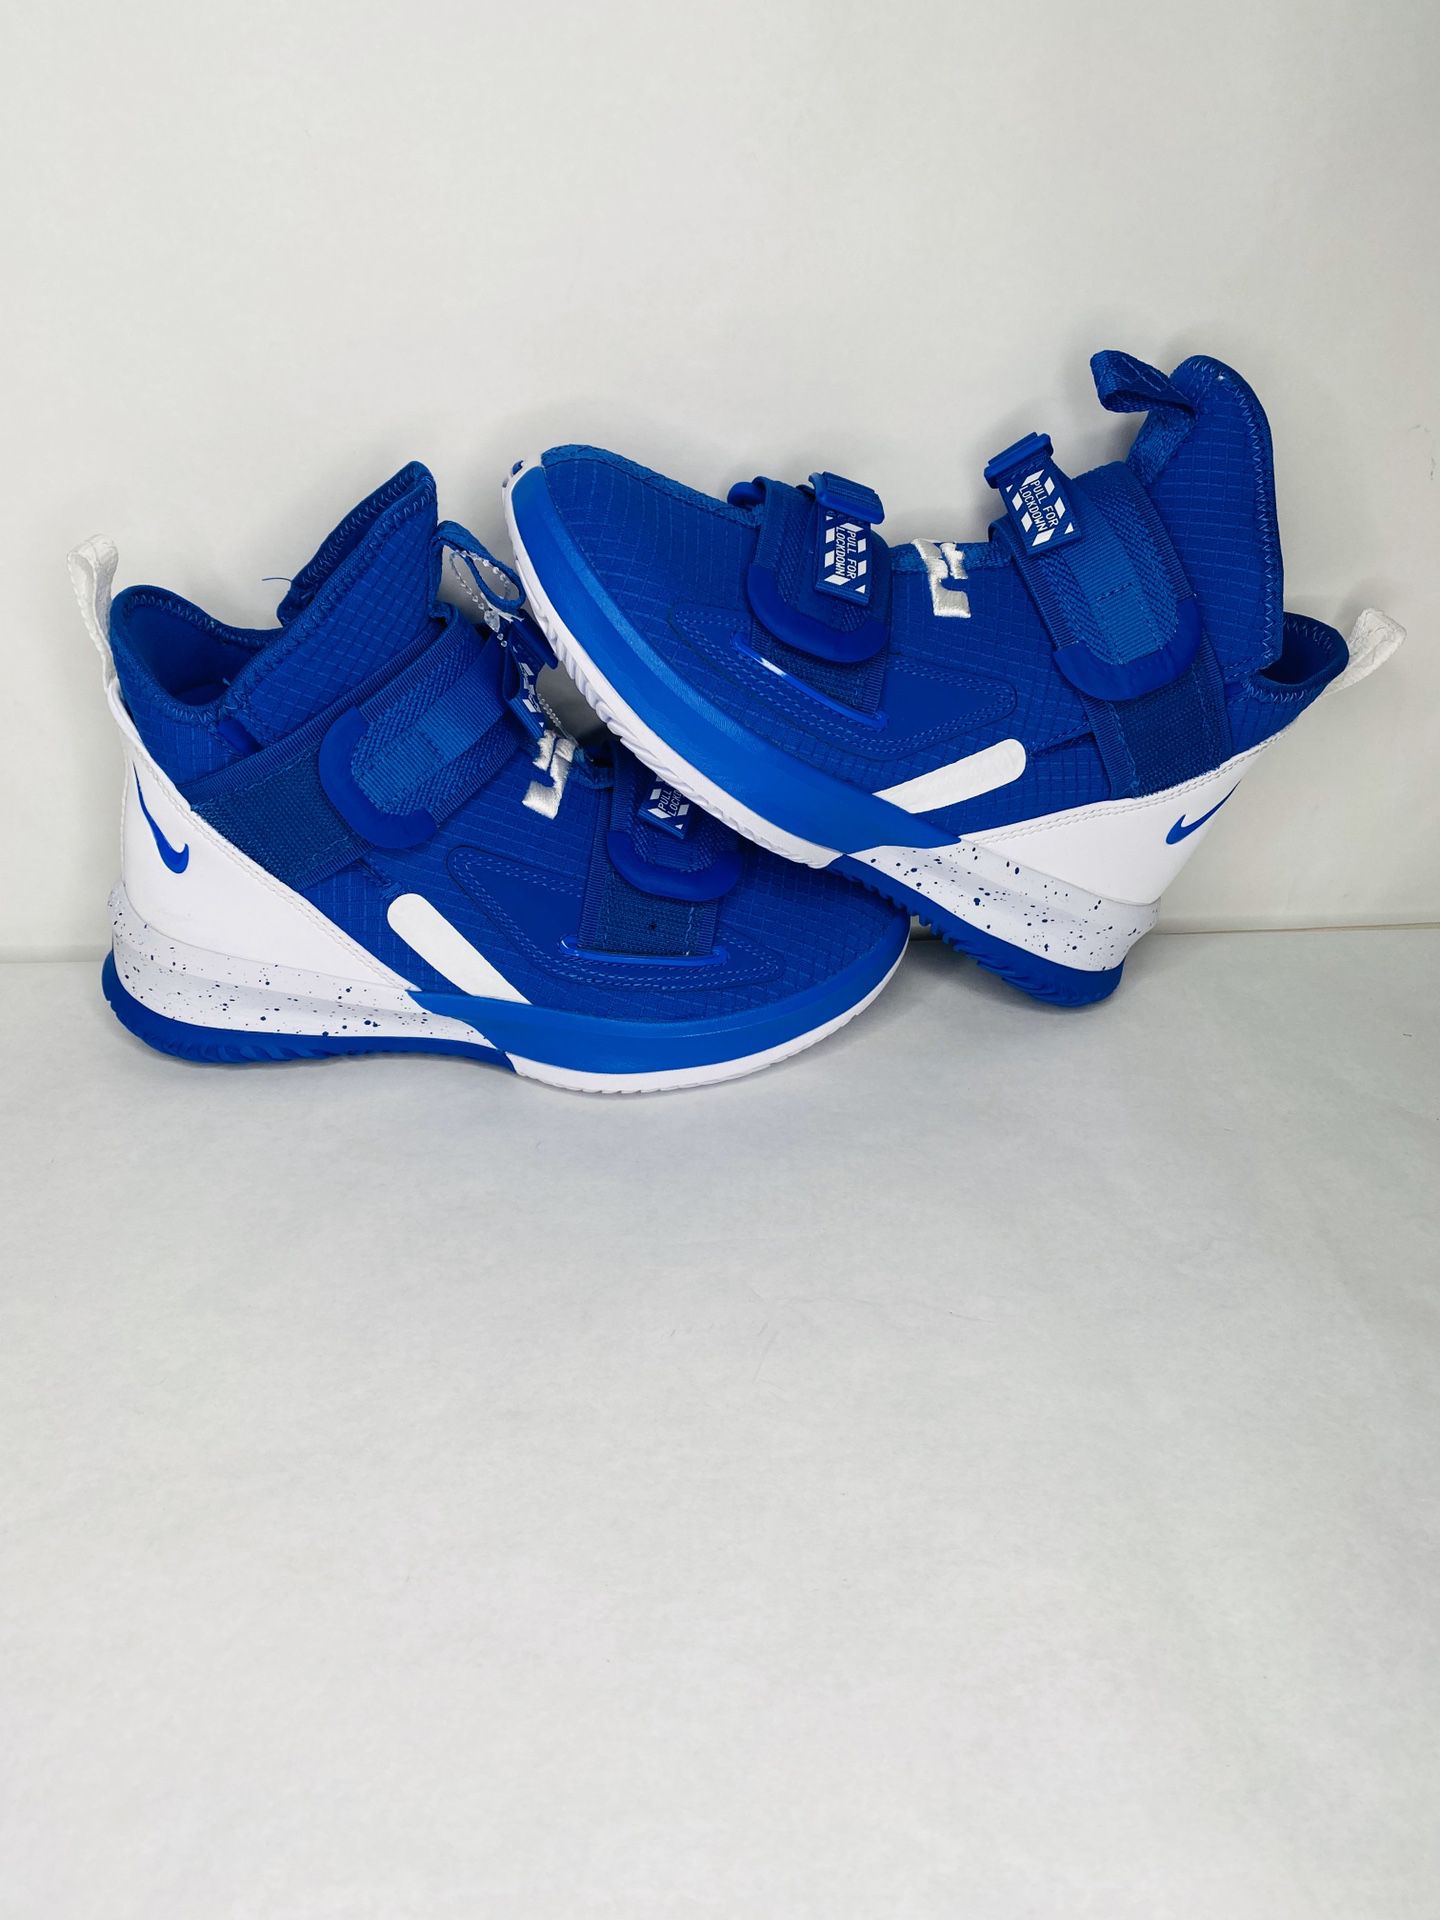 NIKE Lebron Soldier XIII SFG TB Game Royal Blue White CN9809-405 Men's Size 4. Shipped with USPS Priority Mail 100% authentic Blue & white color